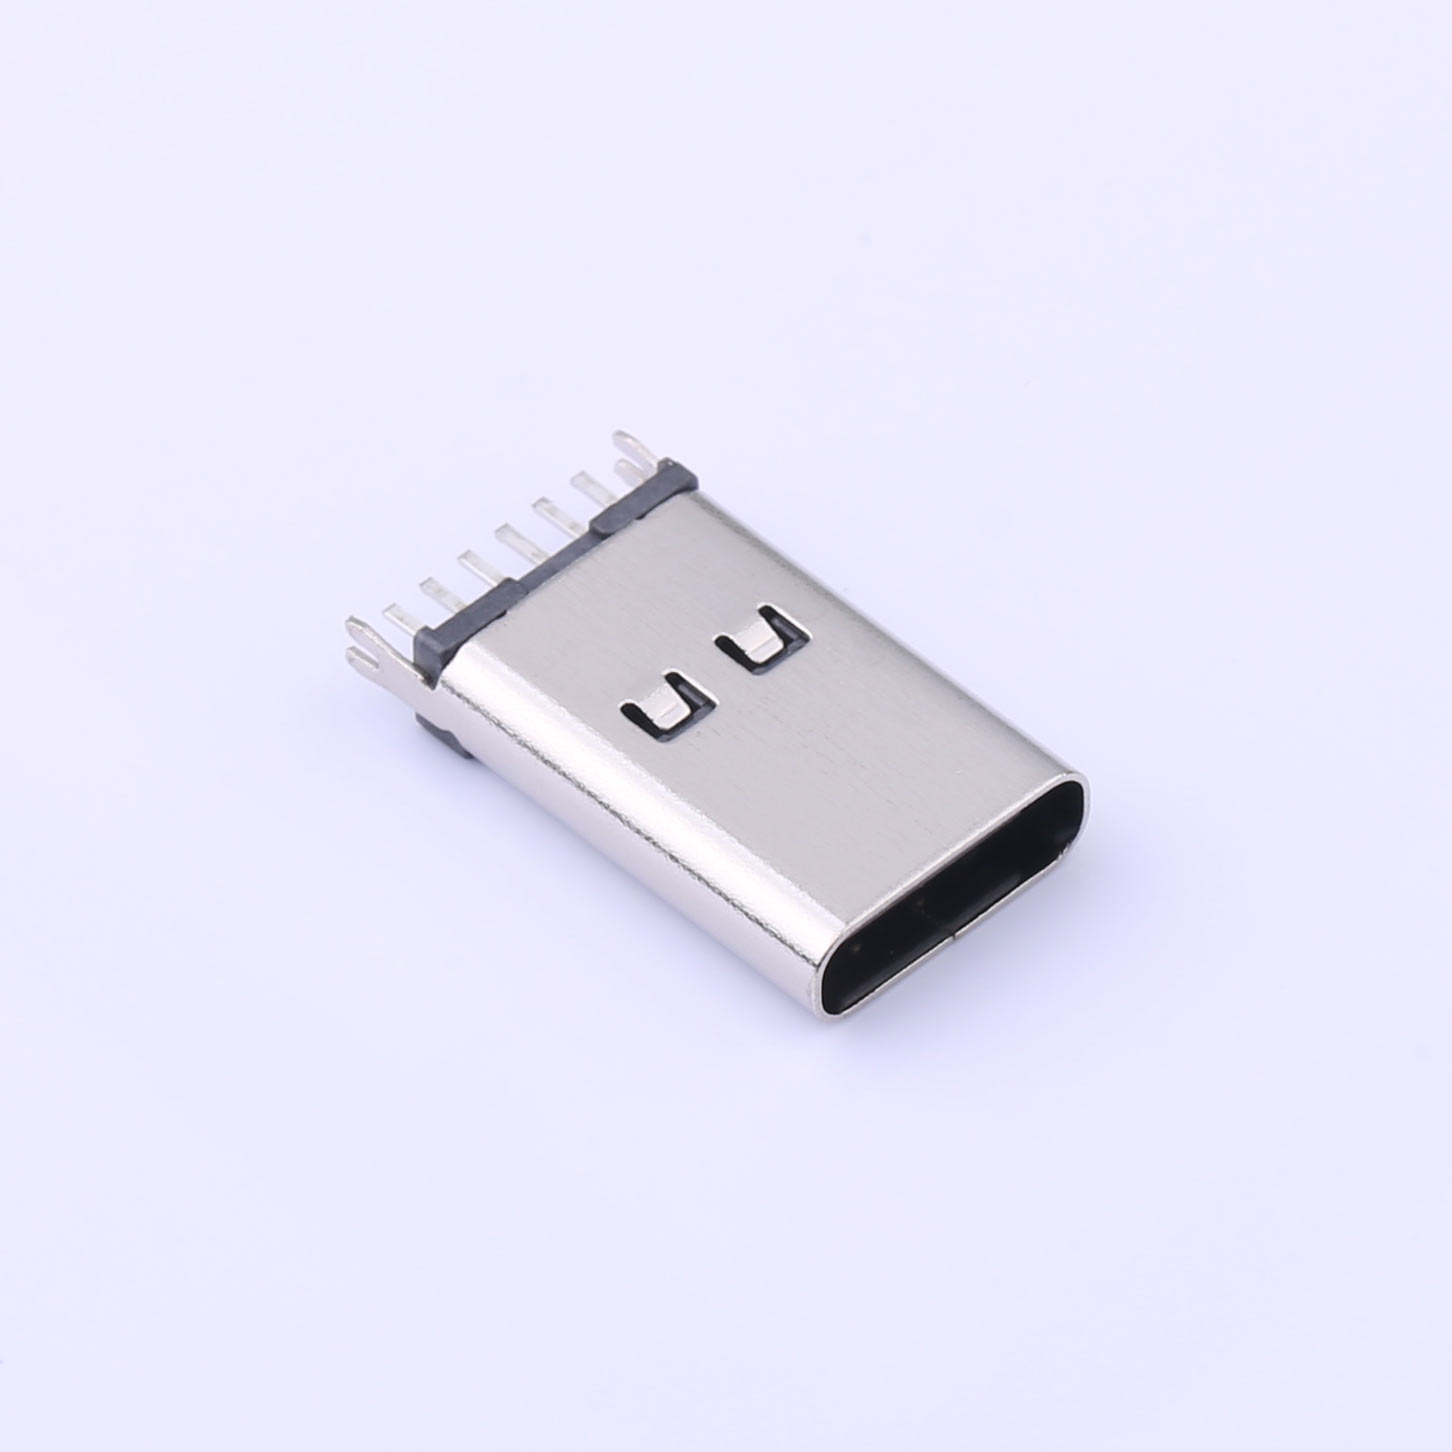 Kinghelm USB Type-C Connector female socket is directly inserted-KH-type-c-l13.7-6p